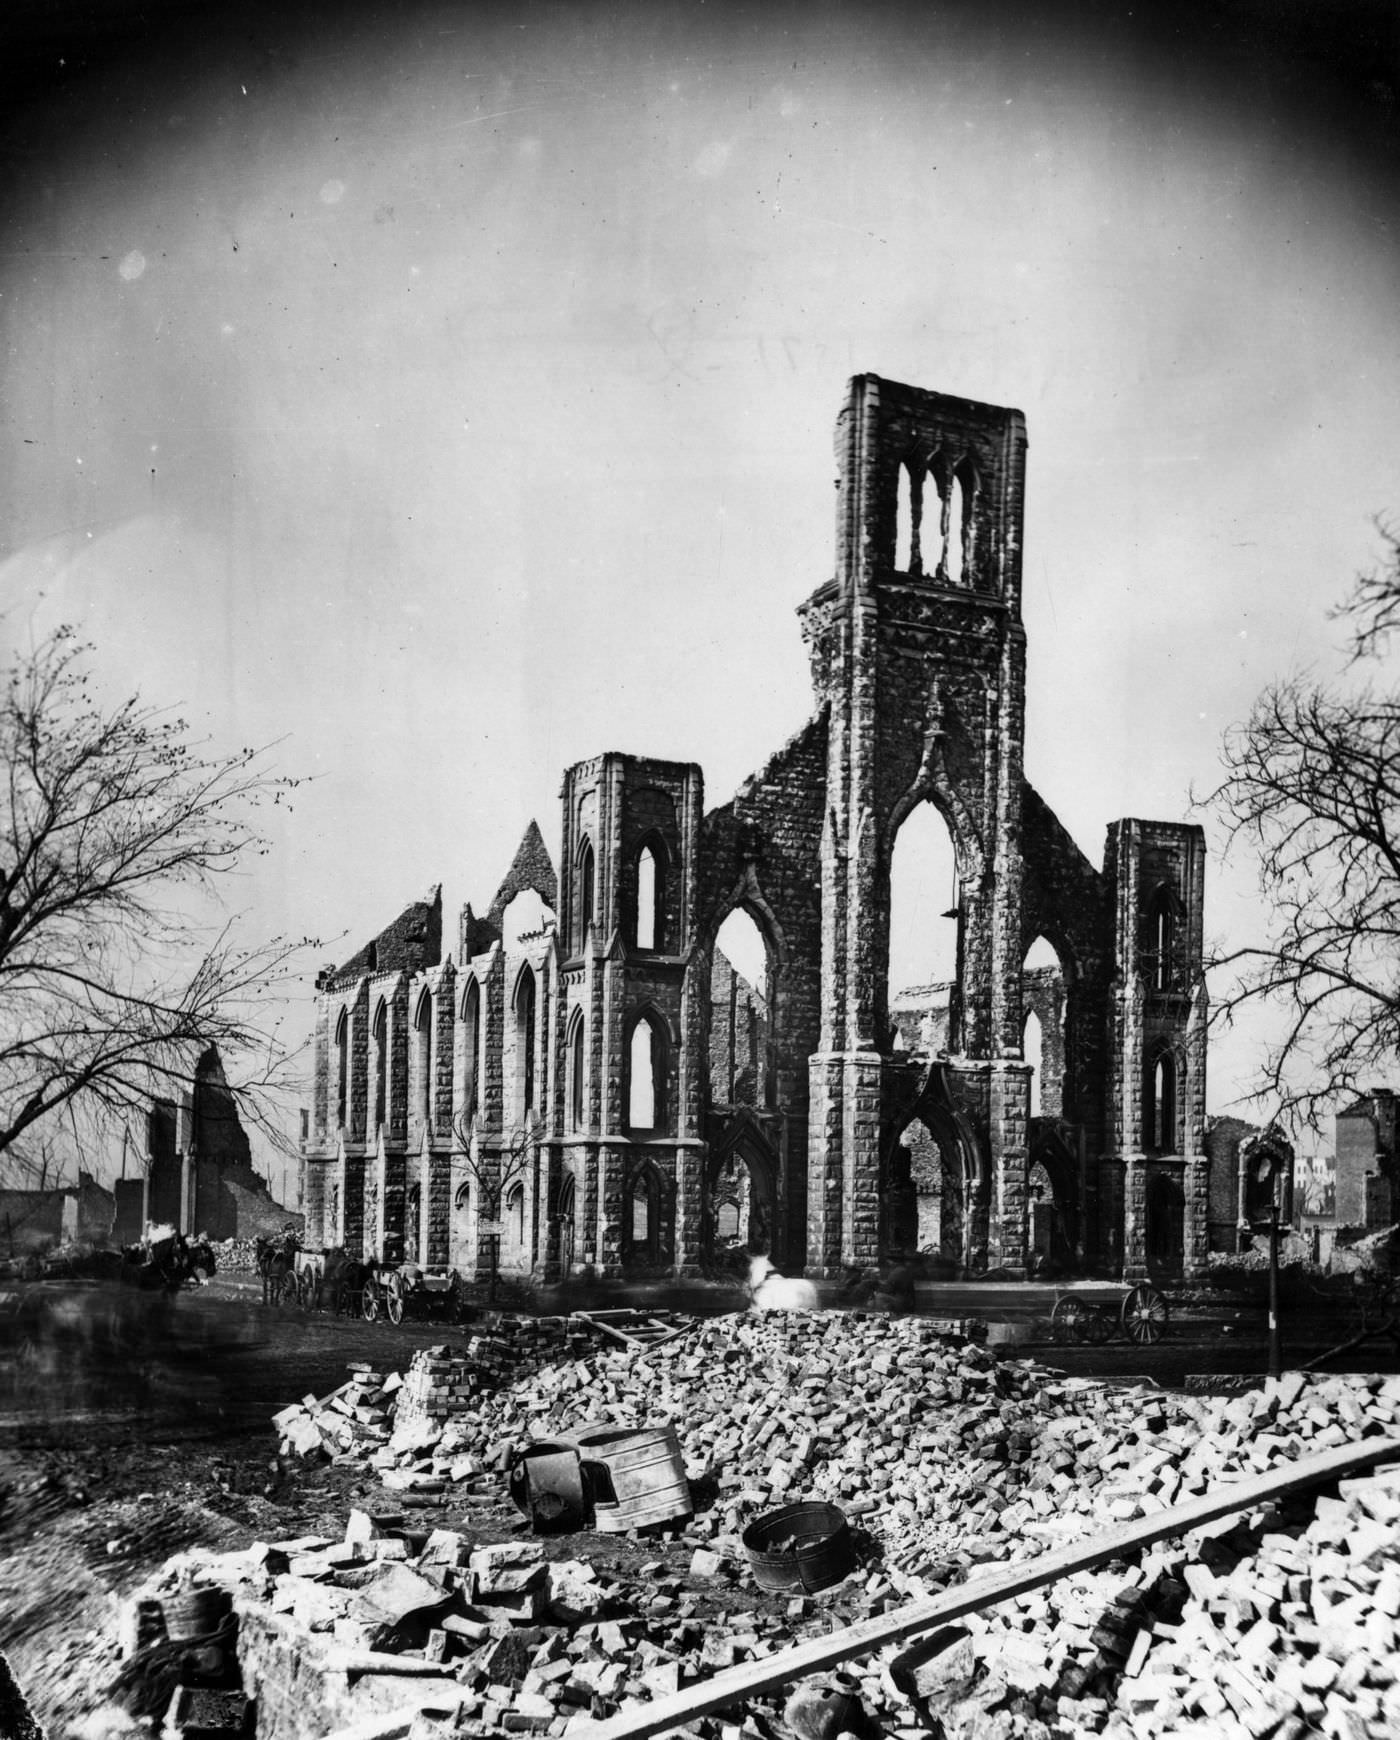 The shell of St. Paul's Universalist Church after the Great Chicago Fire in 1871.